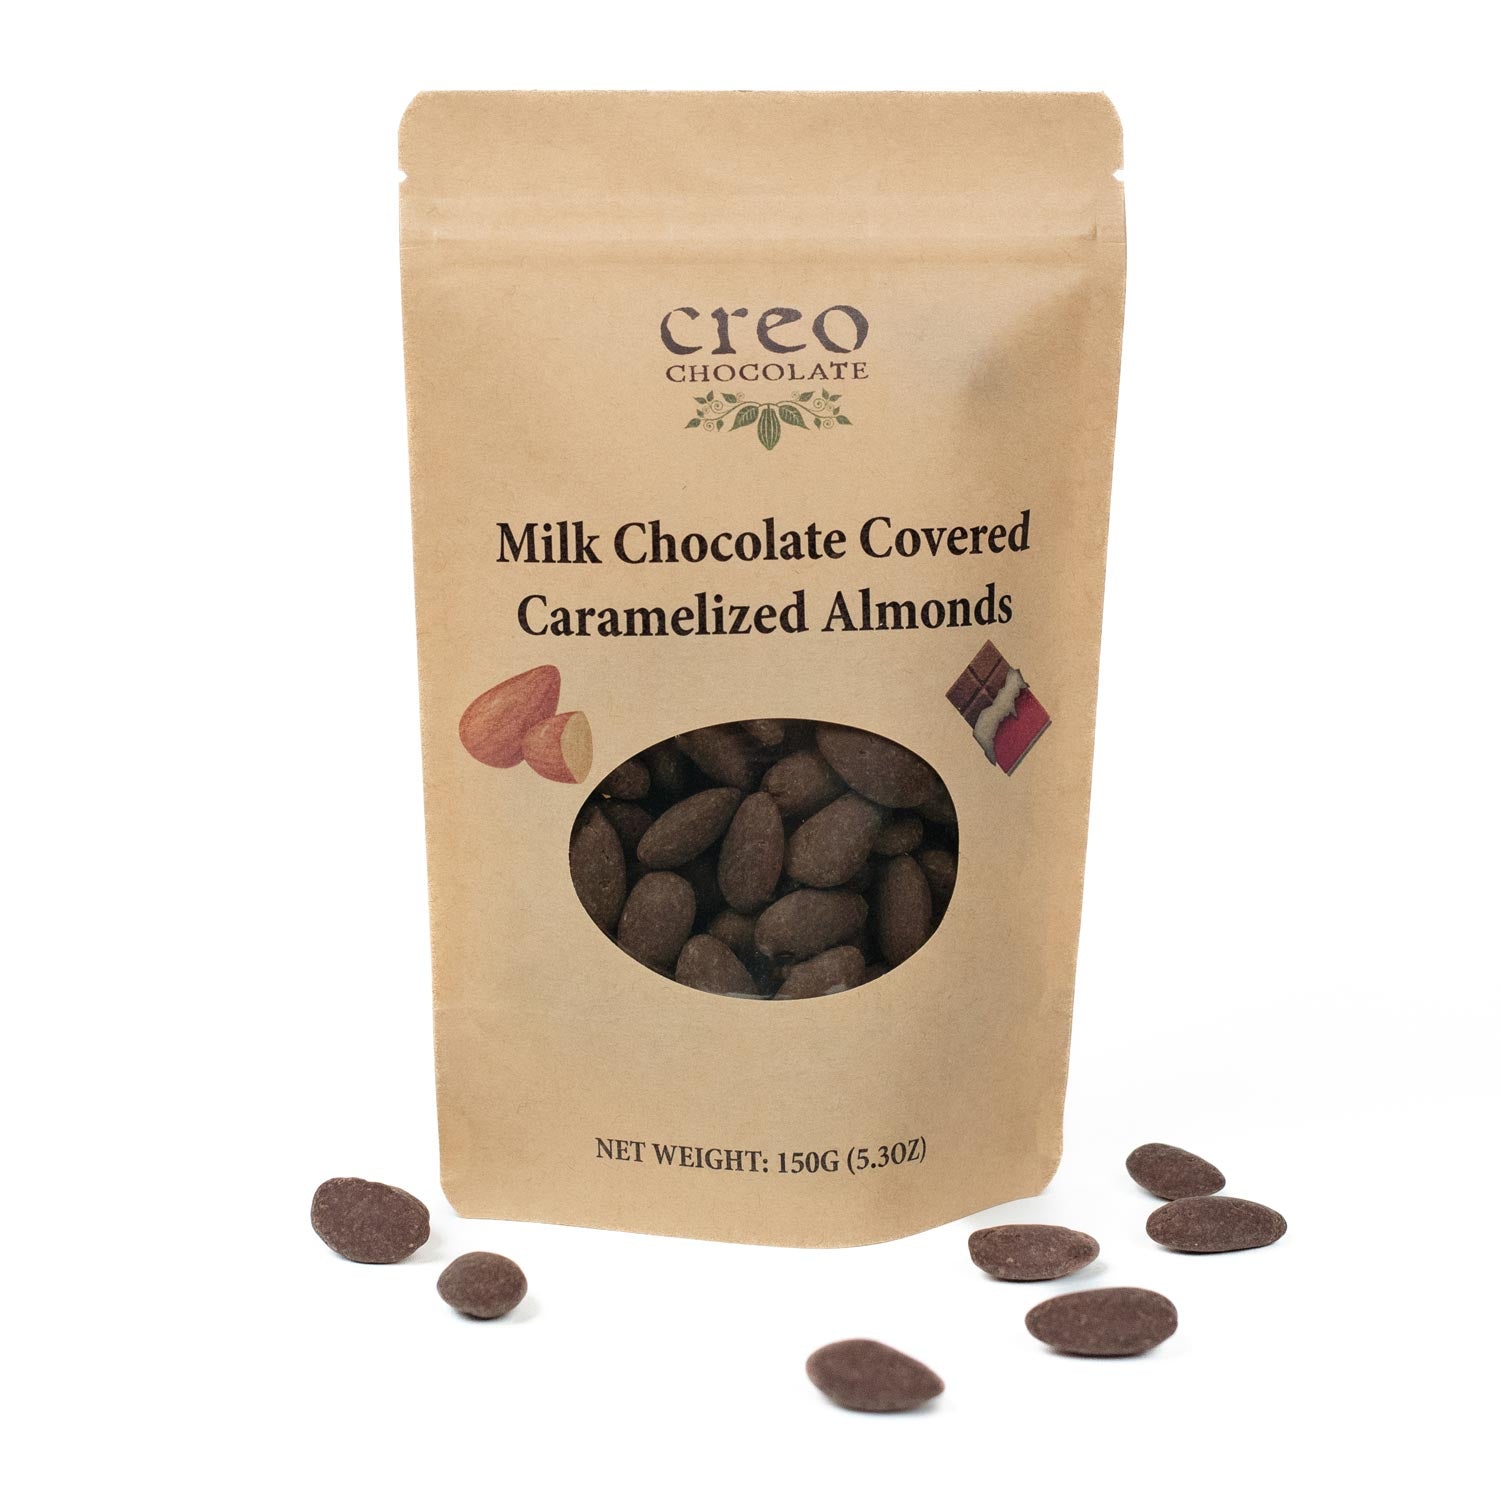 Milk Chocolate Covered Caramelized Almonds